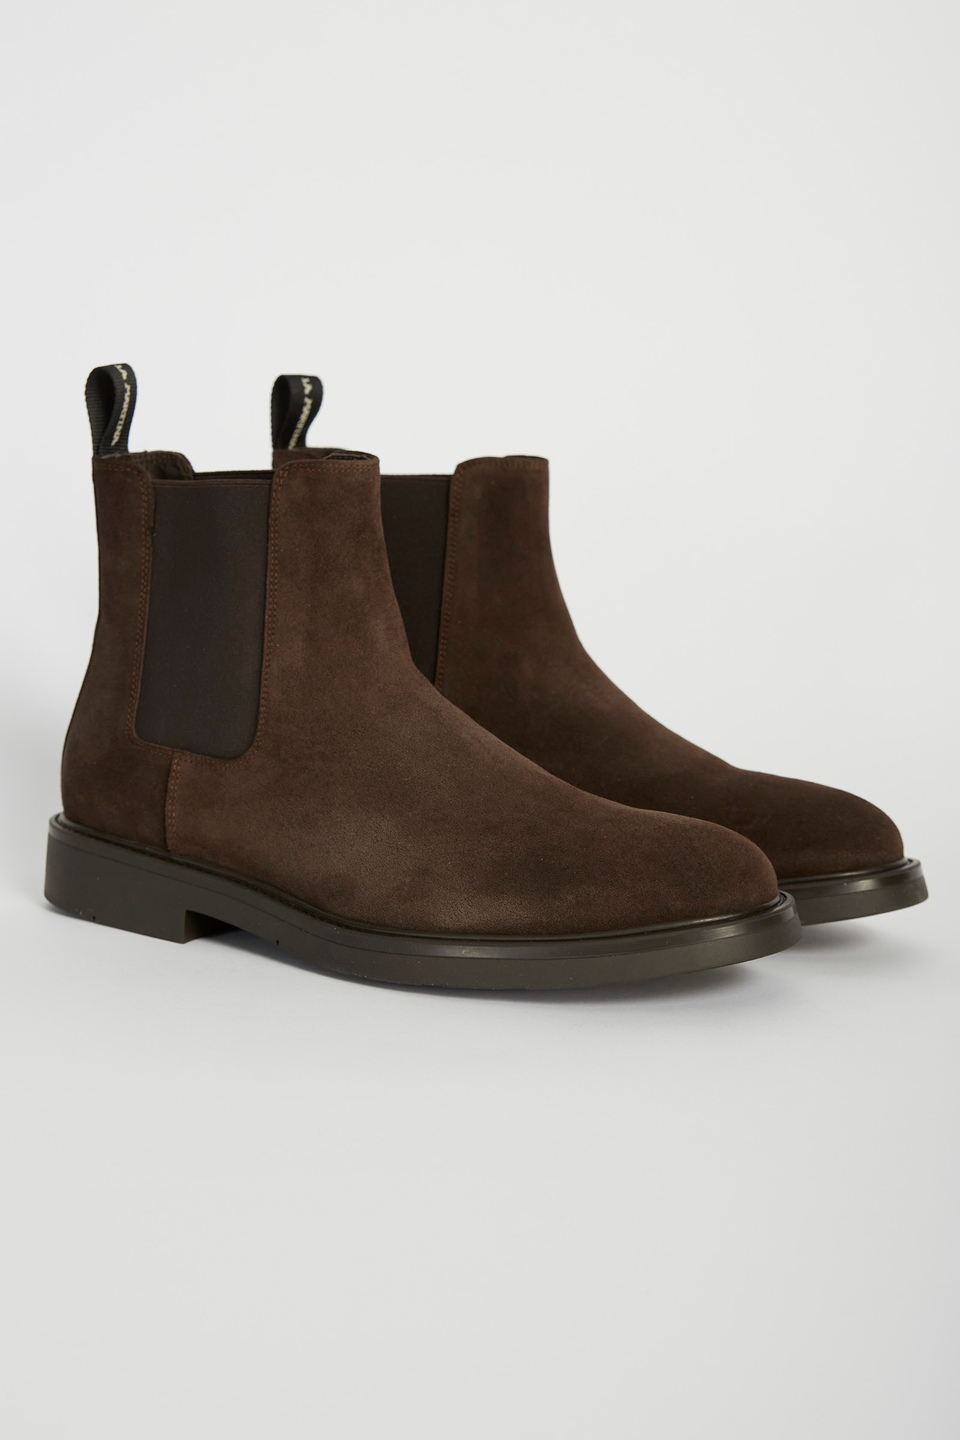 Mixed leather chelsea boot | La Martina - Official Online Shop